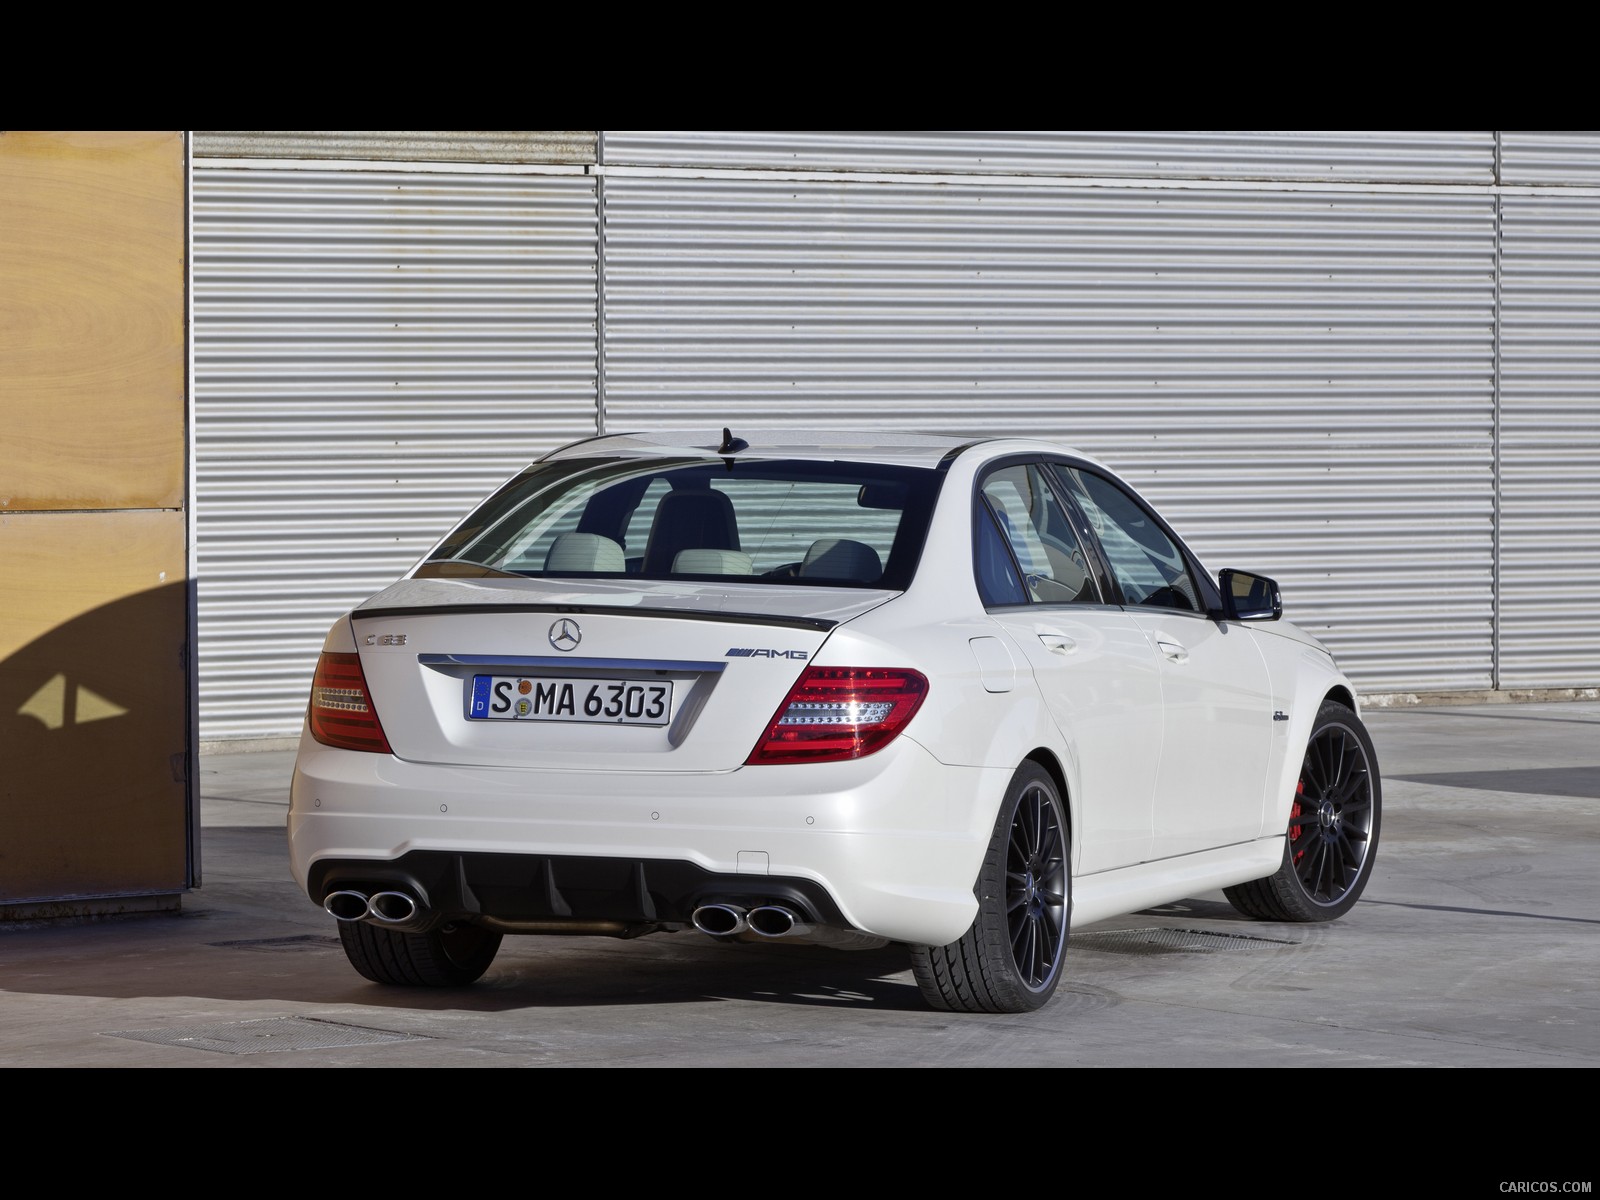 Mercedes-Benz C63 AMG (2012)  - Rear Angle , #12 of 22